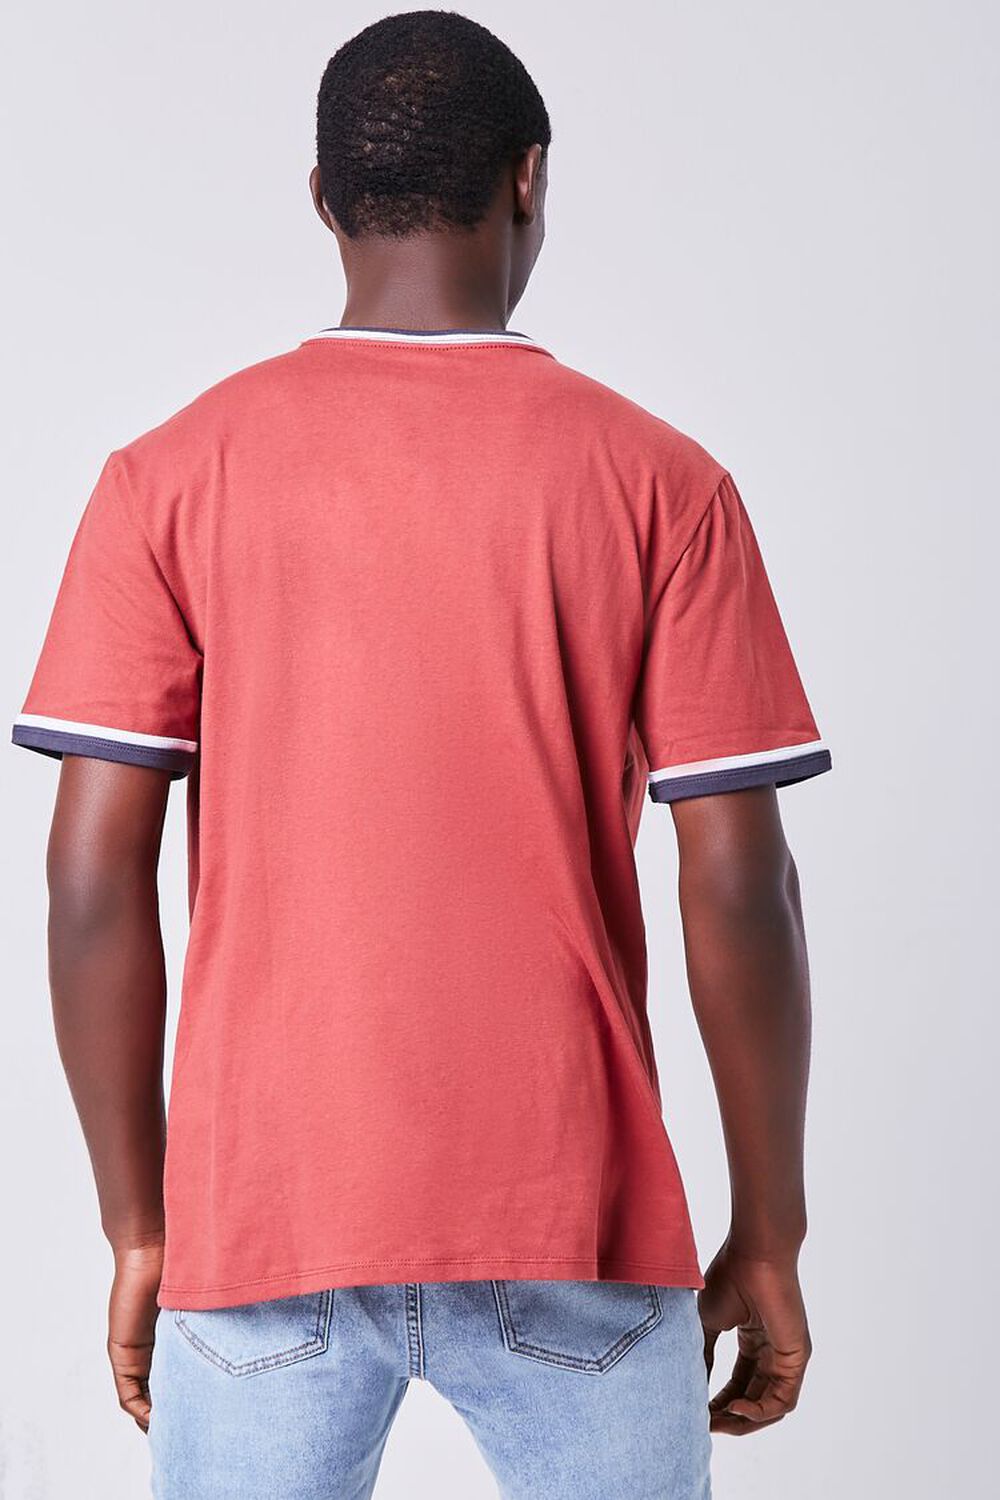 RED Varsity Striped Notched-Neck Tee, image 3